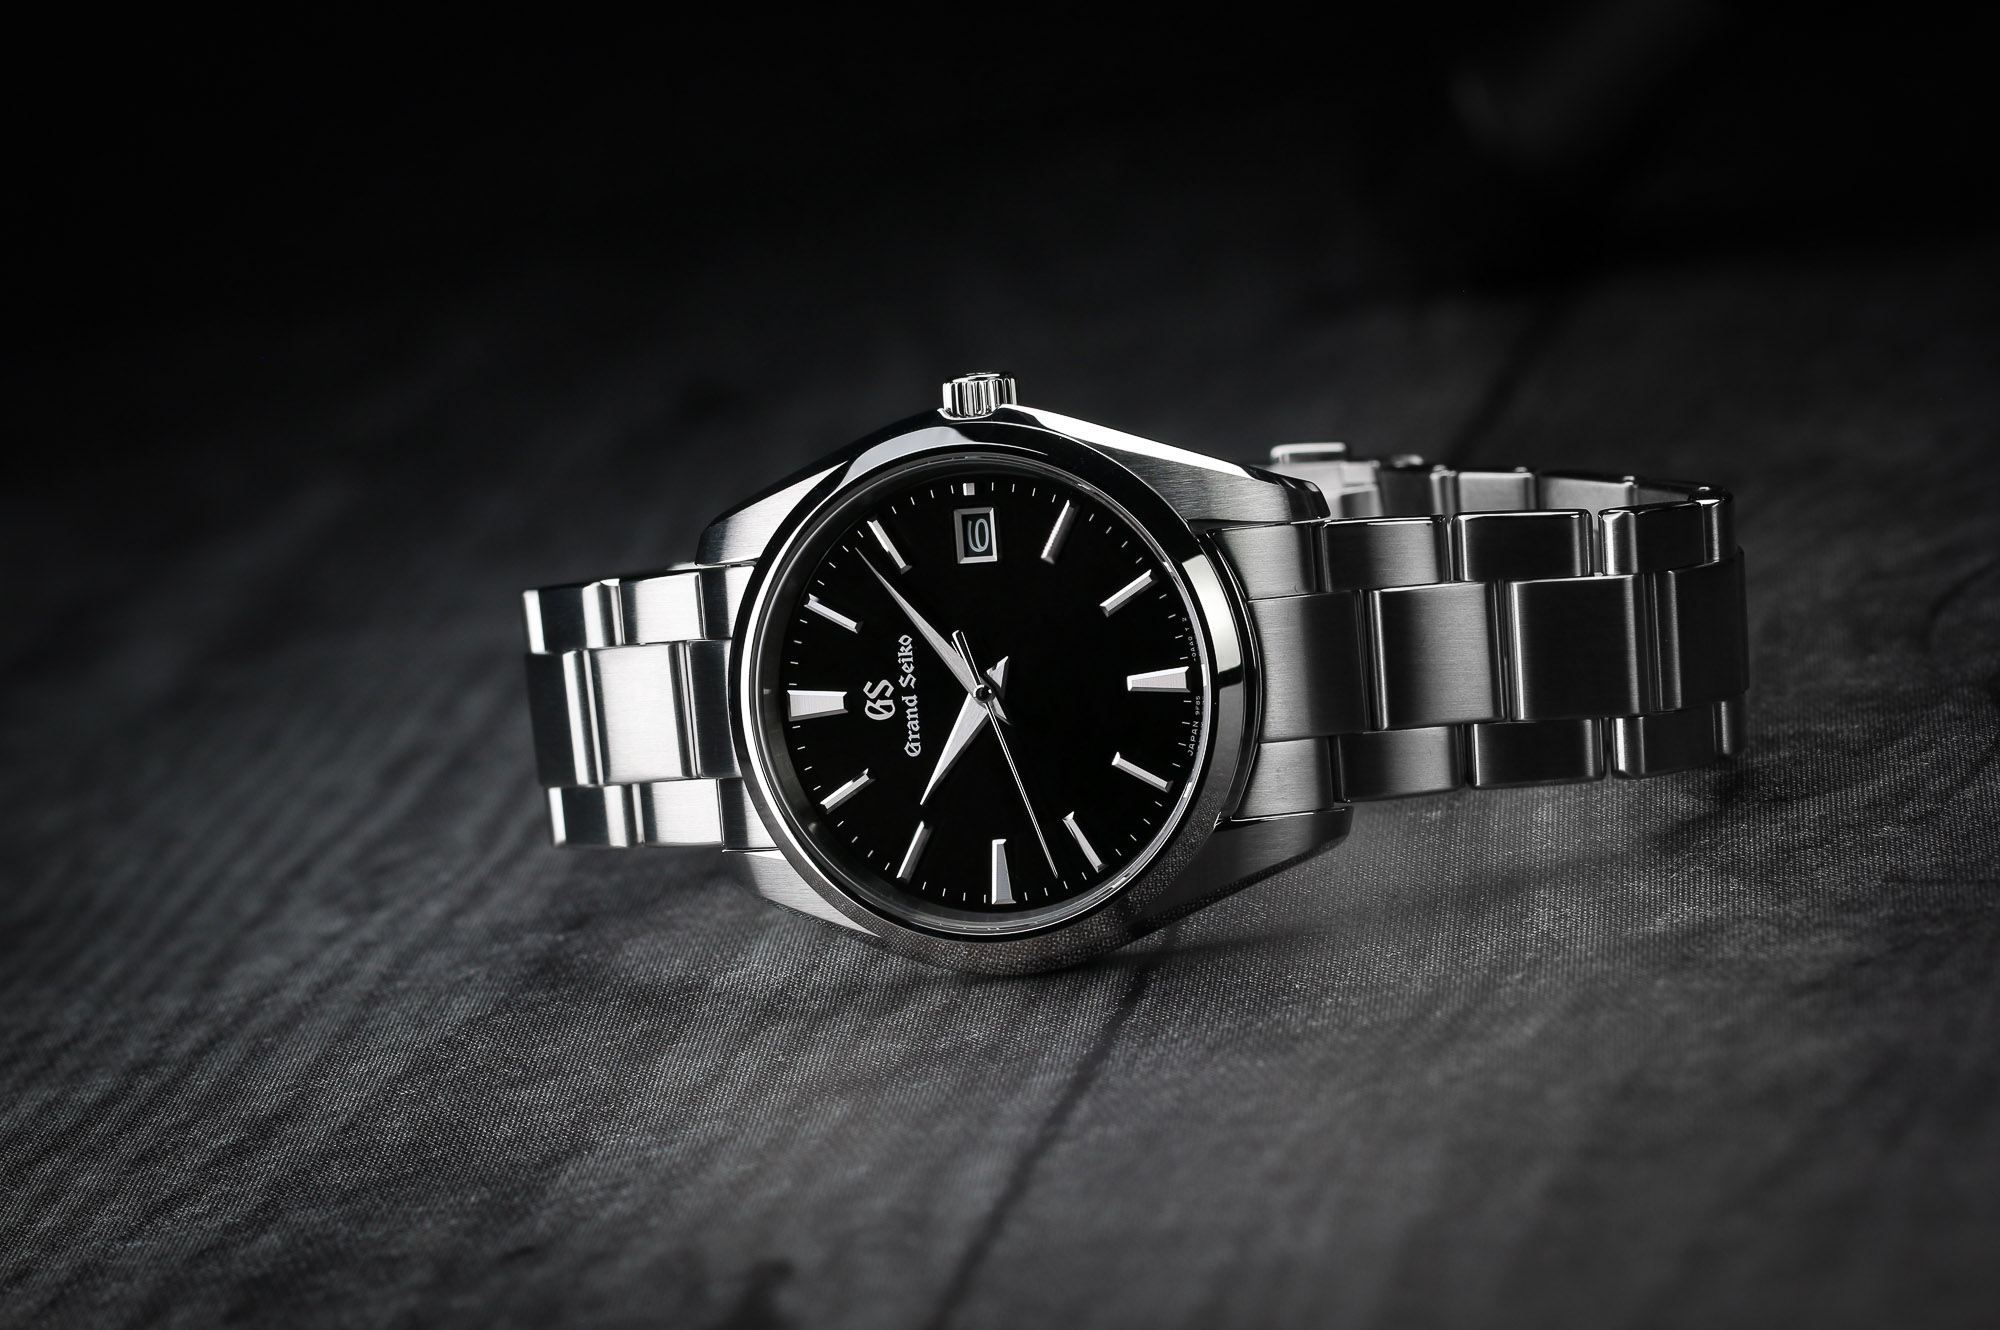 Grand Seiko SBGP011 stainless steel wristwatch with a black dial.